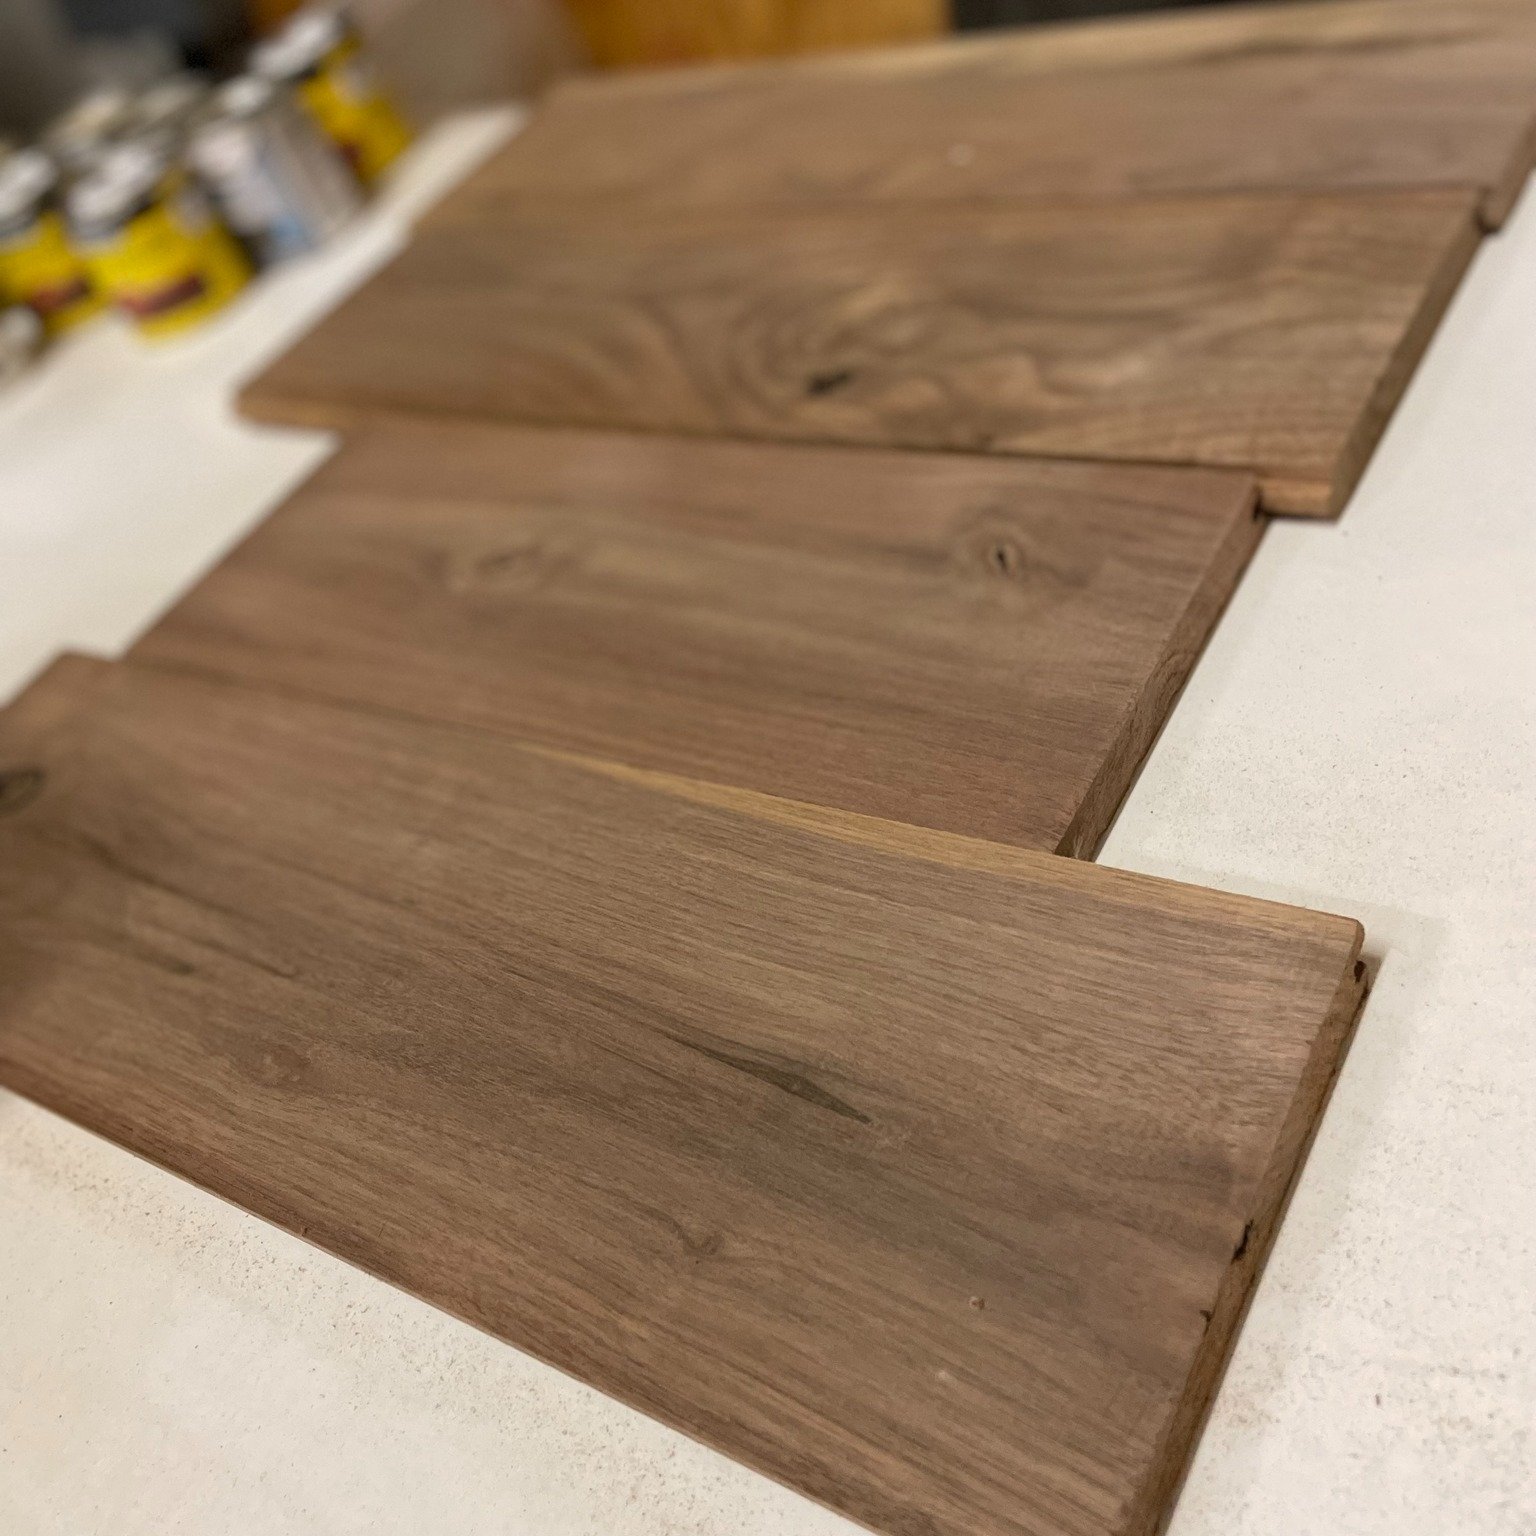 Don't know how to stain wood? Don't have time? That's okay! Let us know and we can do some for you! #stains #woodworking #design #unionchurchmillworks